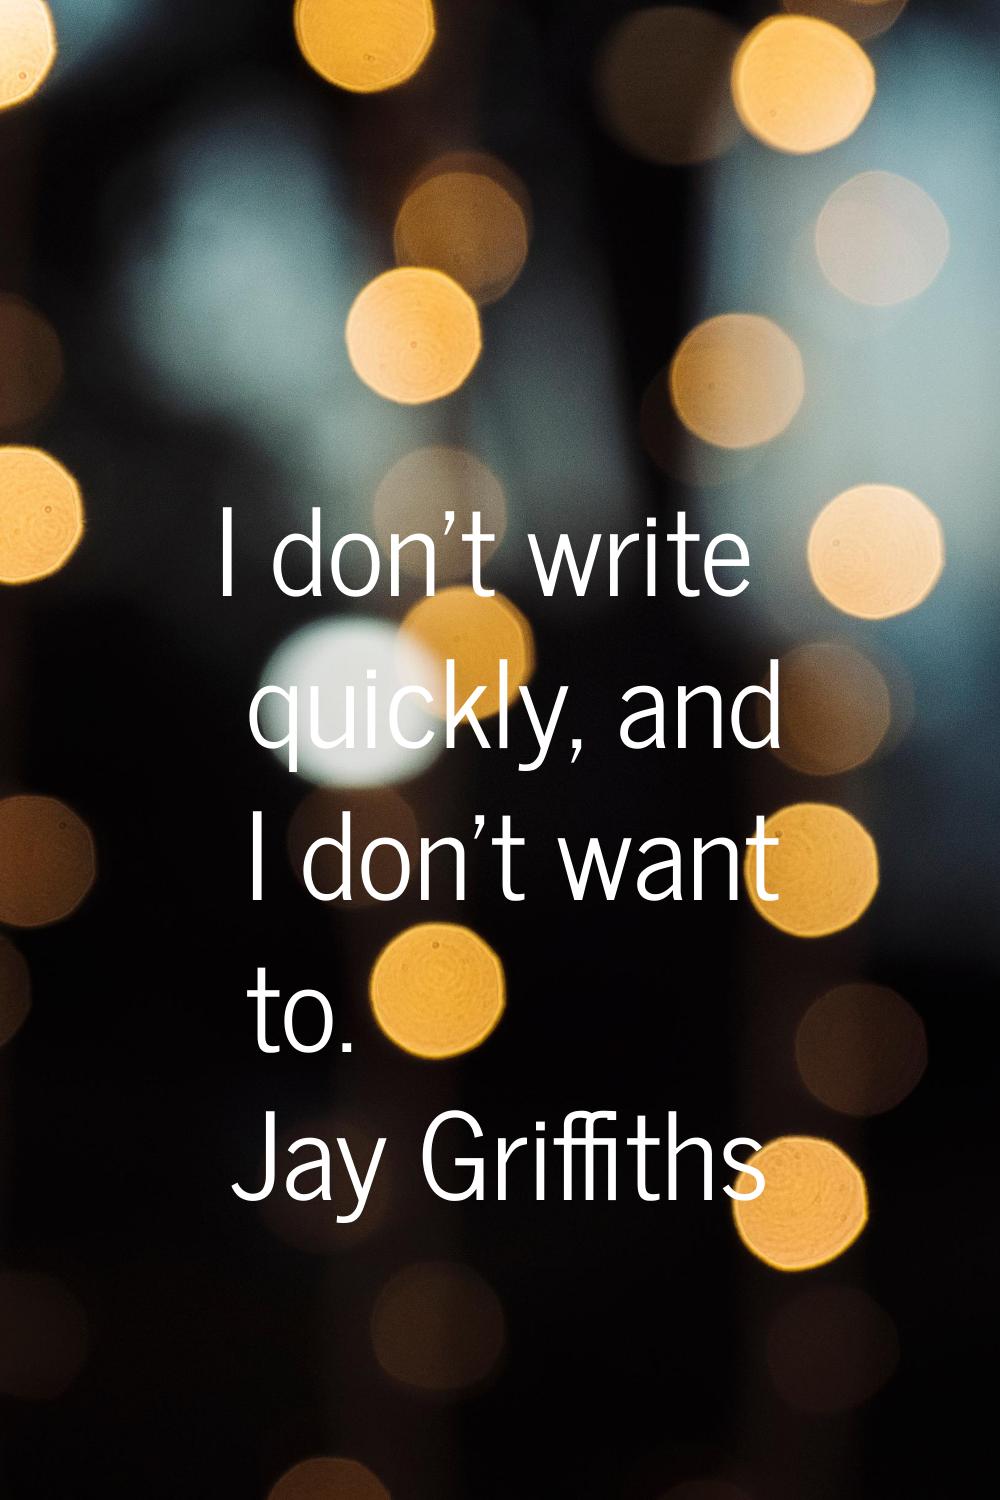 I don't write quickly, and I don't want to.